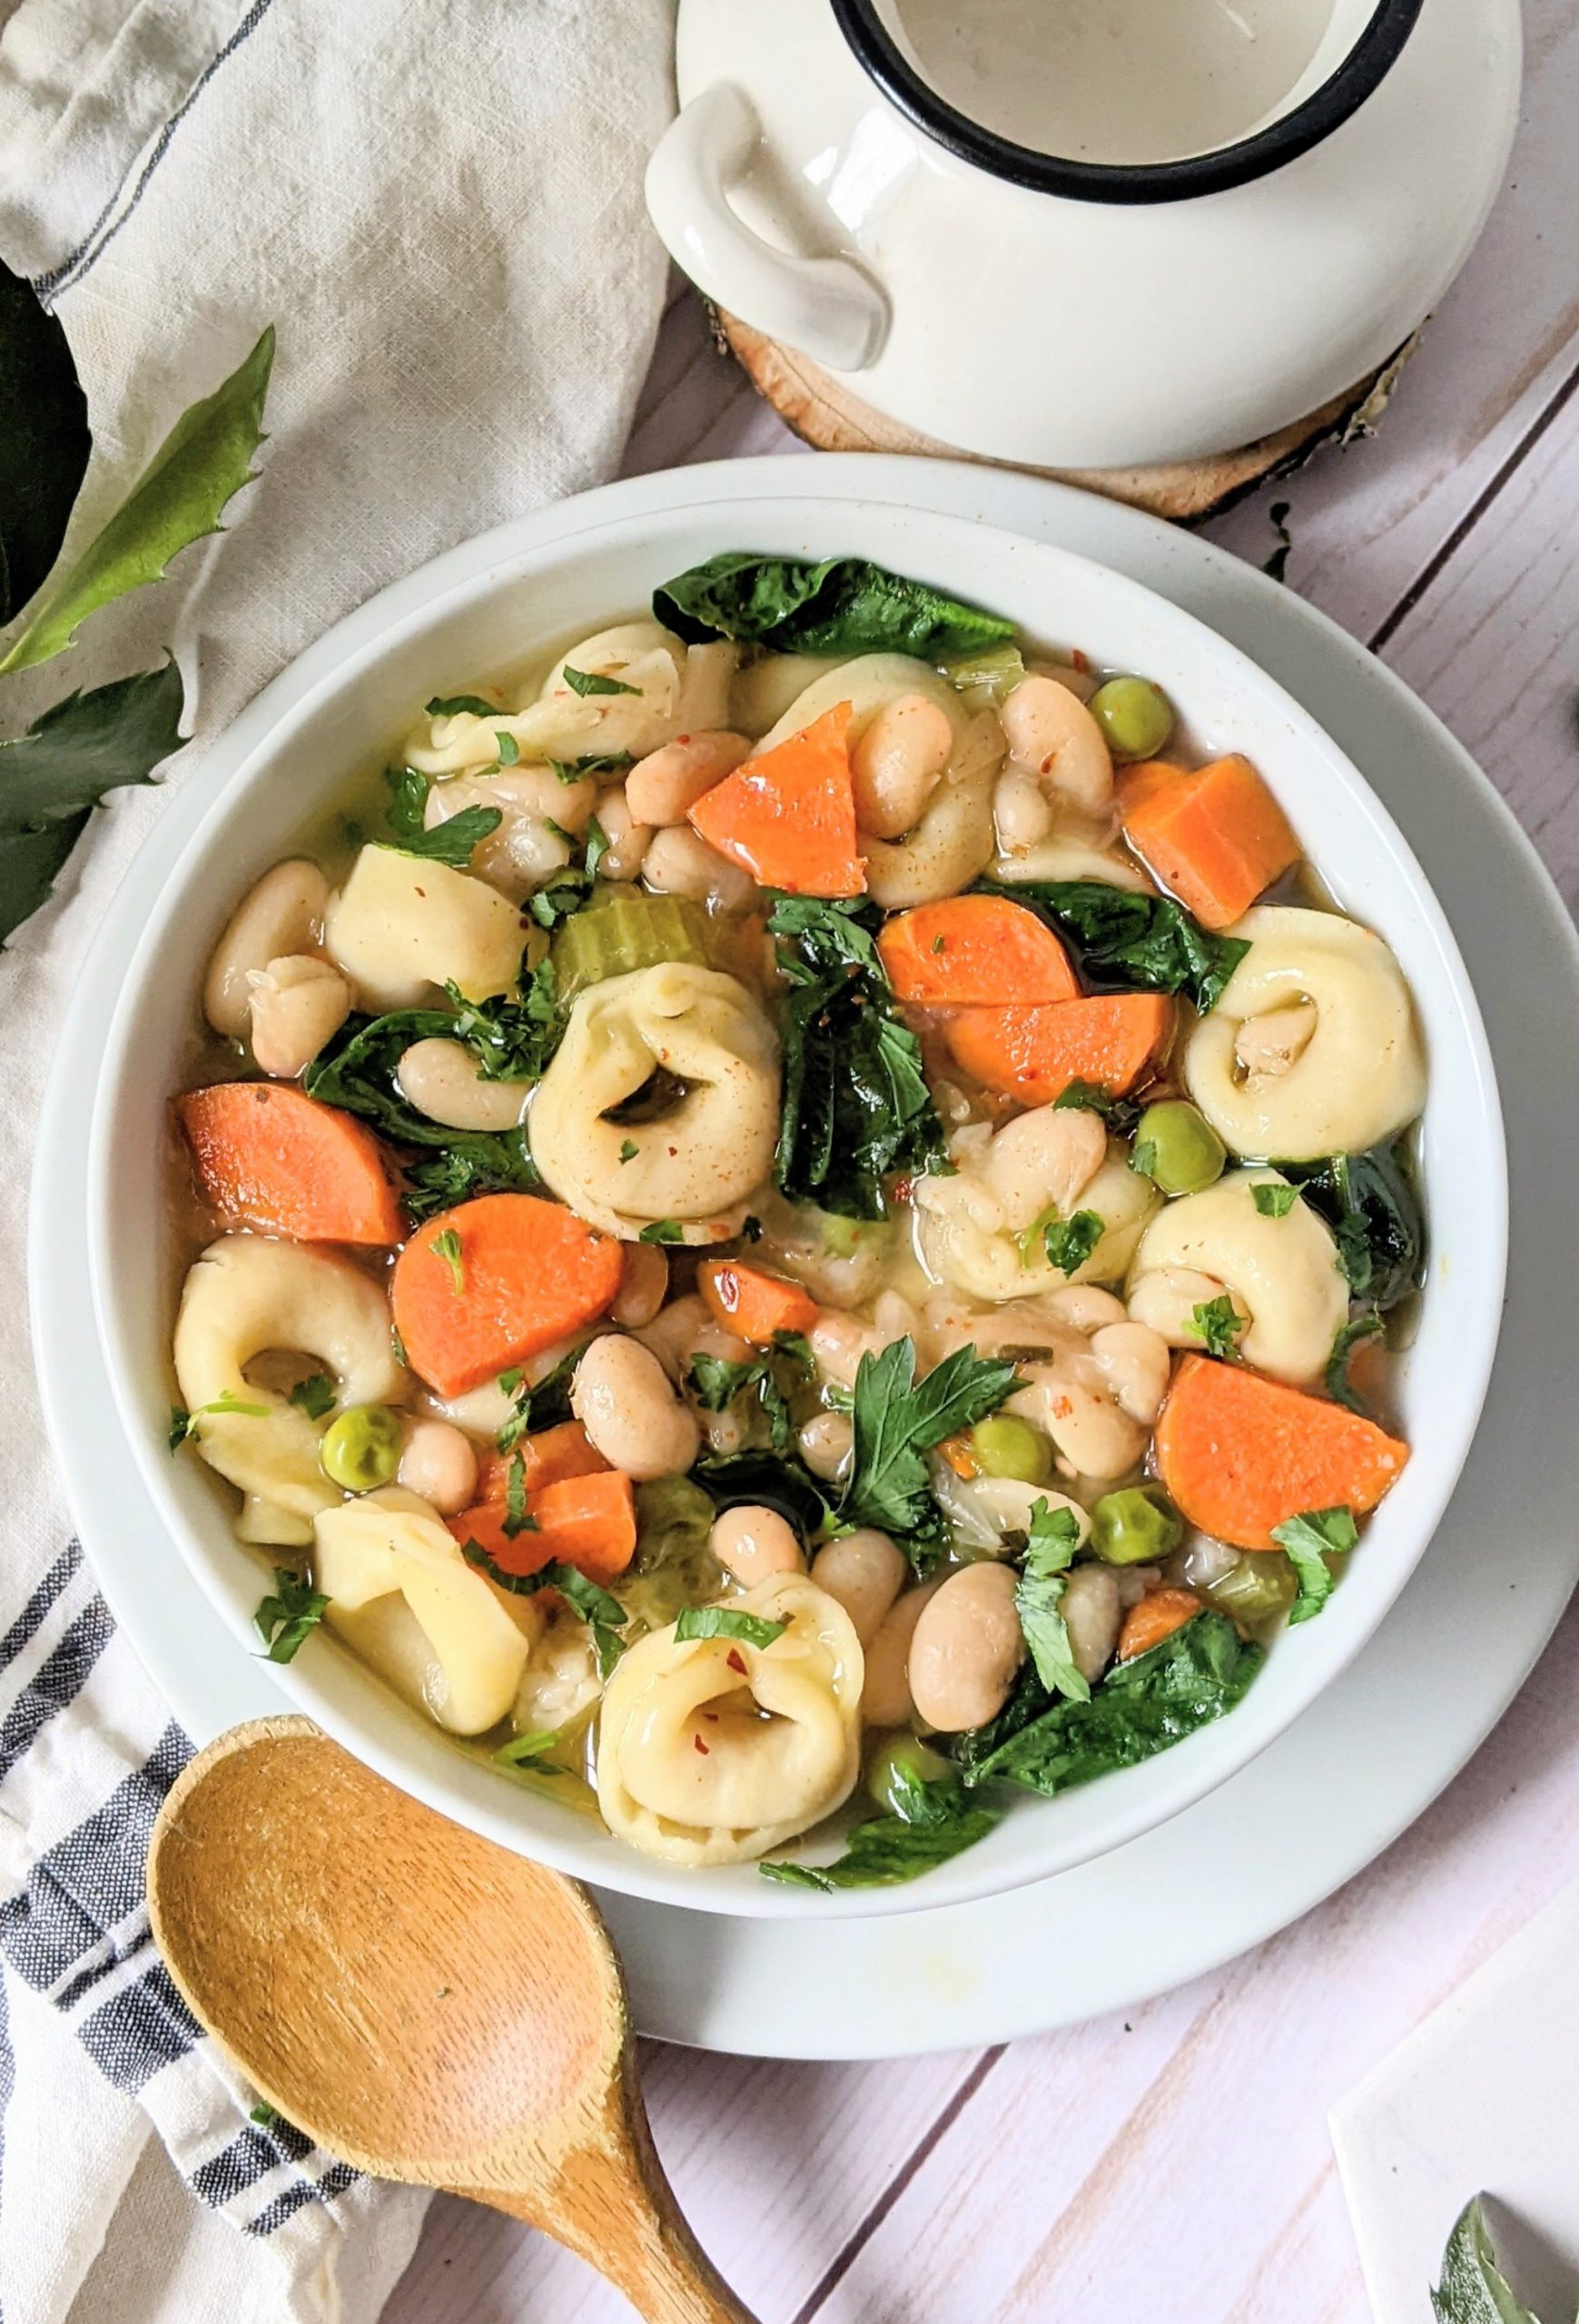 high protein tortellini soup recipe with beans one pot italian soup recipes meatless vegetarian dinner ideas meatless monday filling soup recipes for dinner